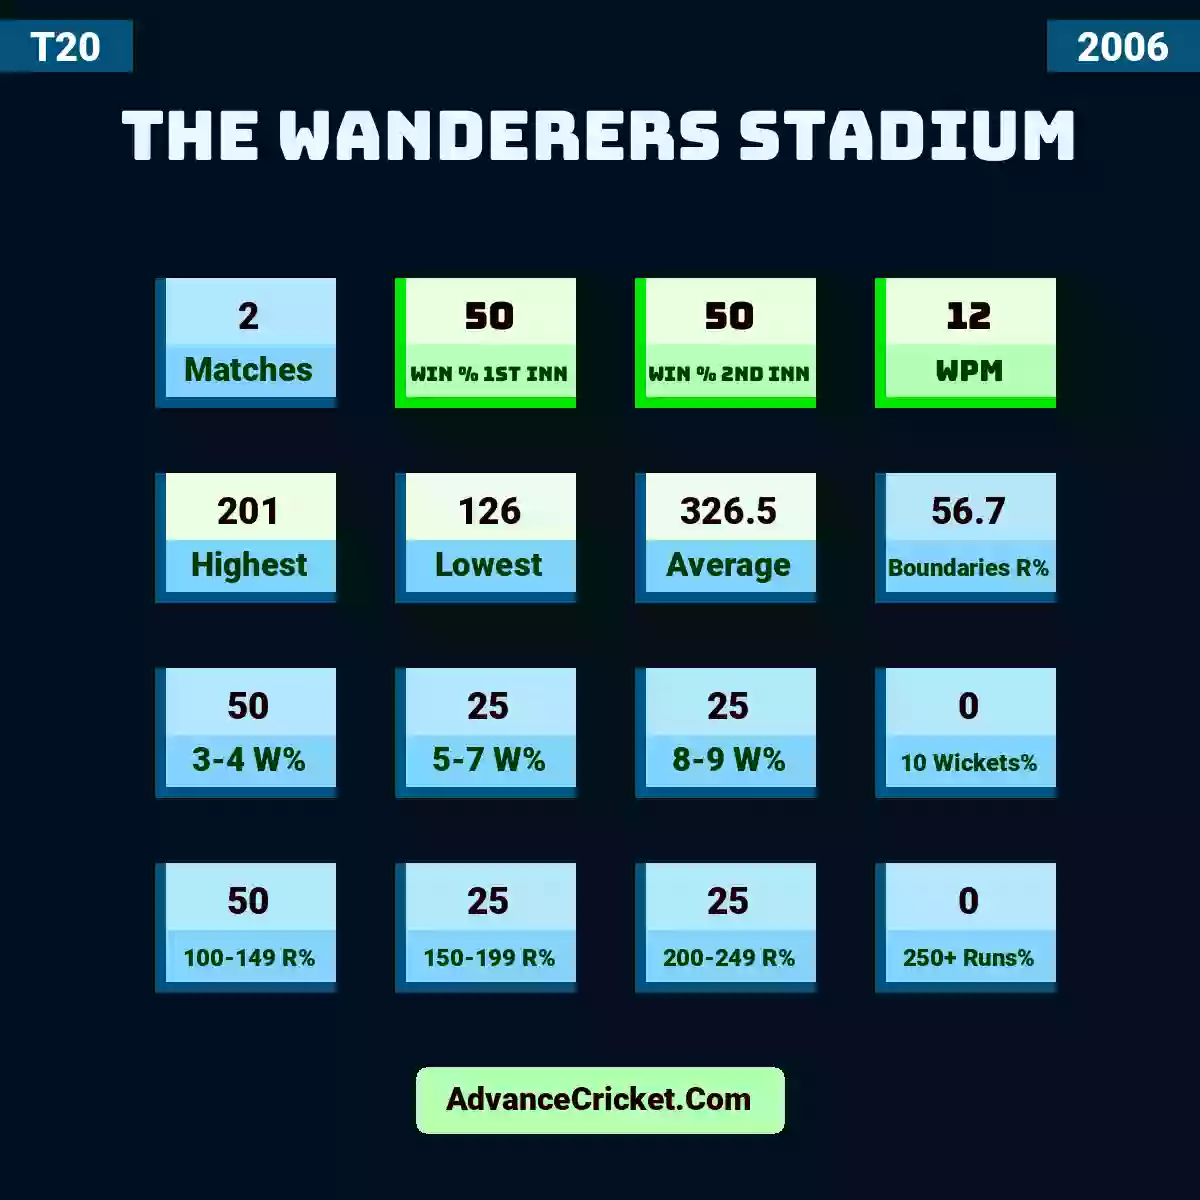 Image showing The Wanderers Stadium with Matches: 2, Win % 1st Inn: 50, Win % 2nd Inn: 50, WPM: 12, Highest: 201, Lowest: 126, Average: 326.5, Boundaries R%: 56.7, 3-4 W%: 50, 5-7 W%: 25, 8-9 W%: 25, 10 Wickets%: 0, 100-149 R%: 50, 150-199 R%: 25, 200-249 R%: 25, 250+ Runs%: 0.